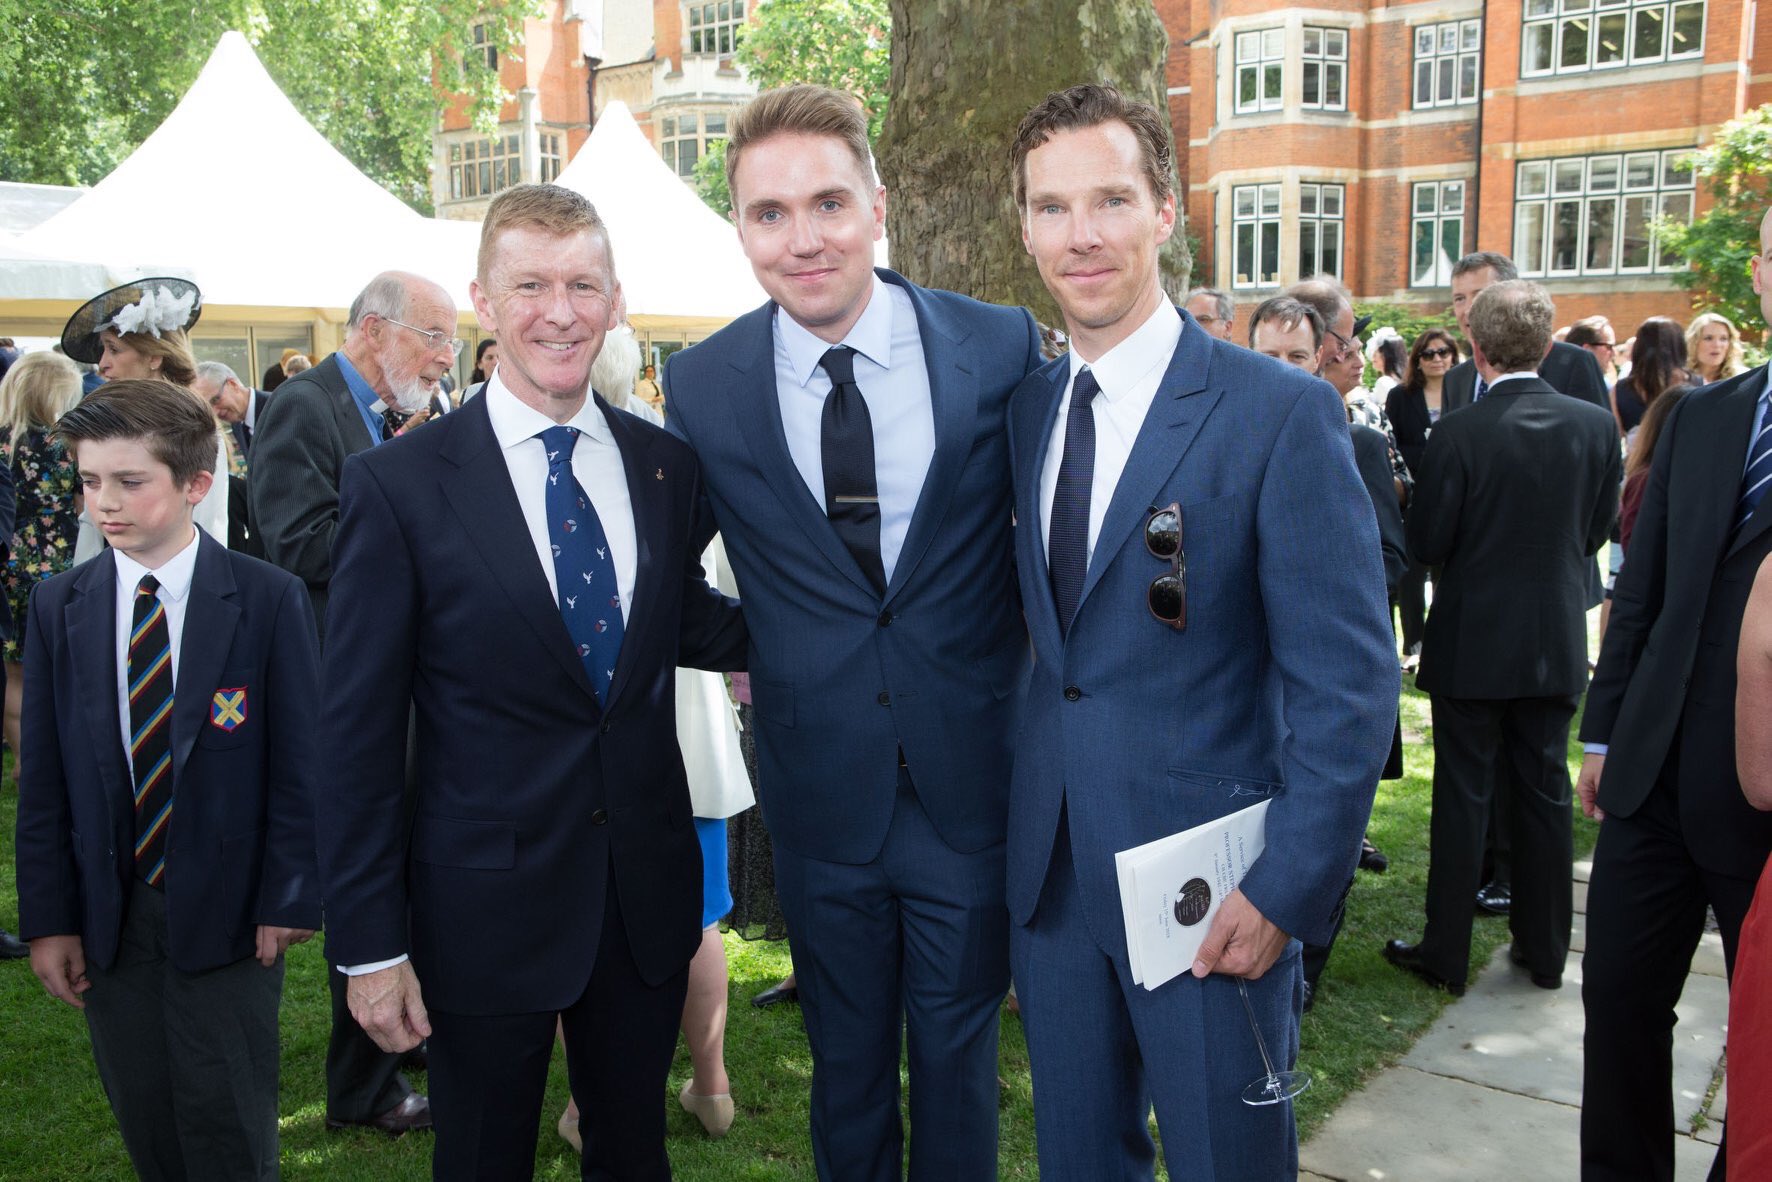 Andrea Williams on Twitter: "My lovely former Tim Hawking with Tim Peake &amp; Benedict at Stephen Hawking's memorial yesterday: https://t.co/4F5P6y3tZG" / Twitter